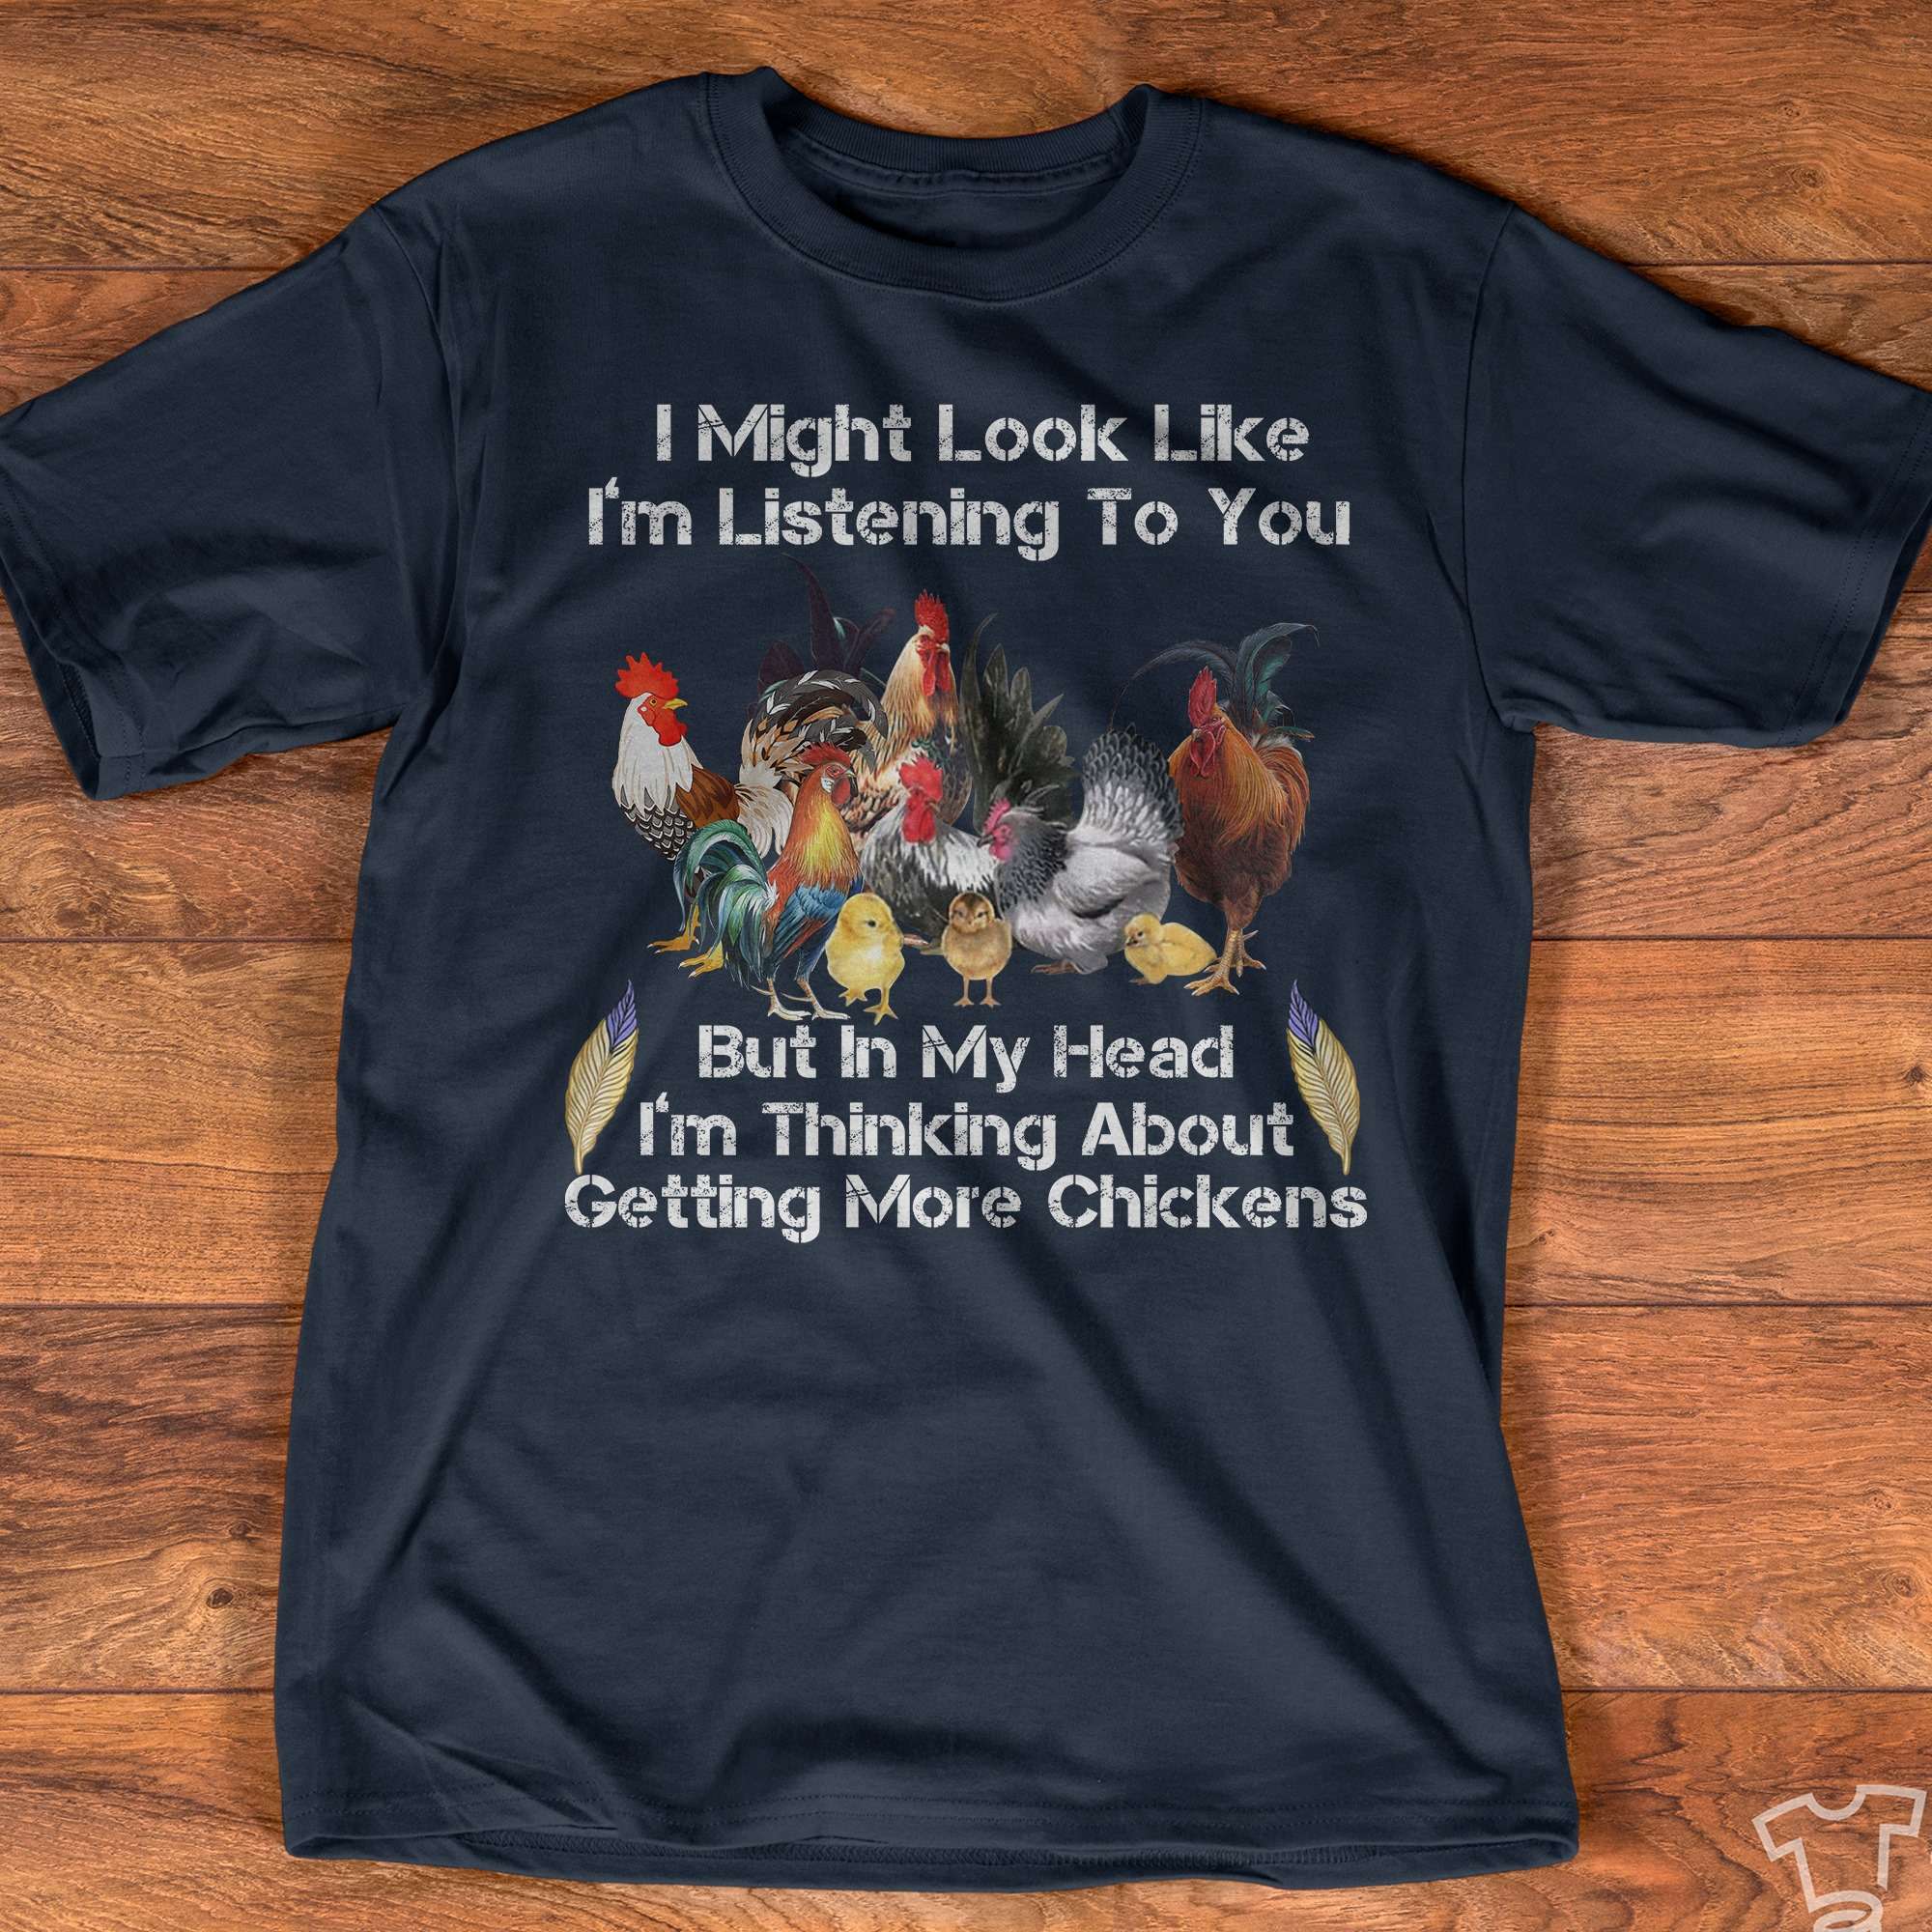 I might look like I'm listening to you but in my head I'm thinking about getting more chickens - Chicken family, chicken people gift